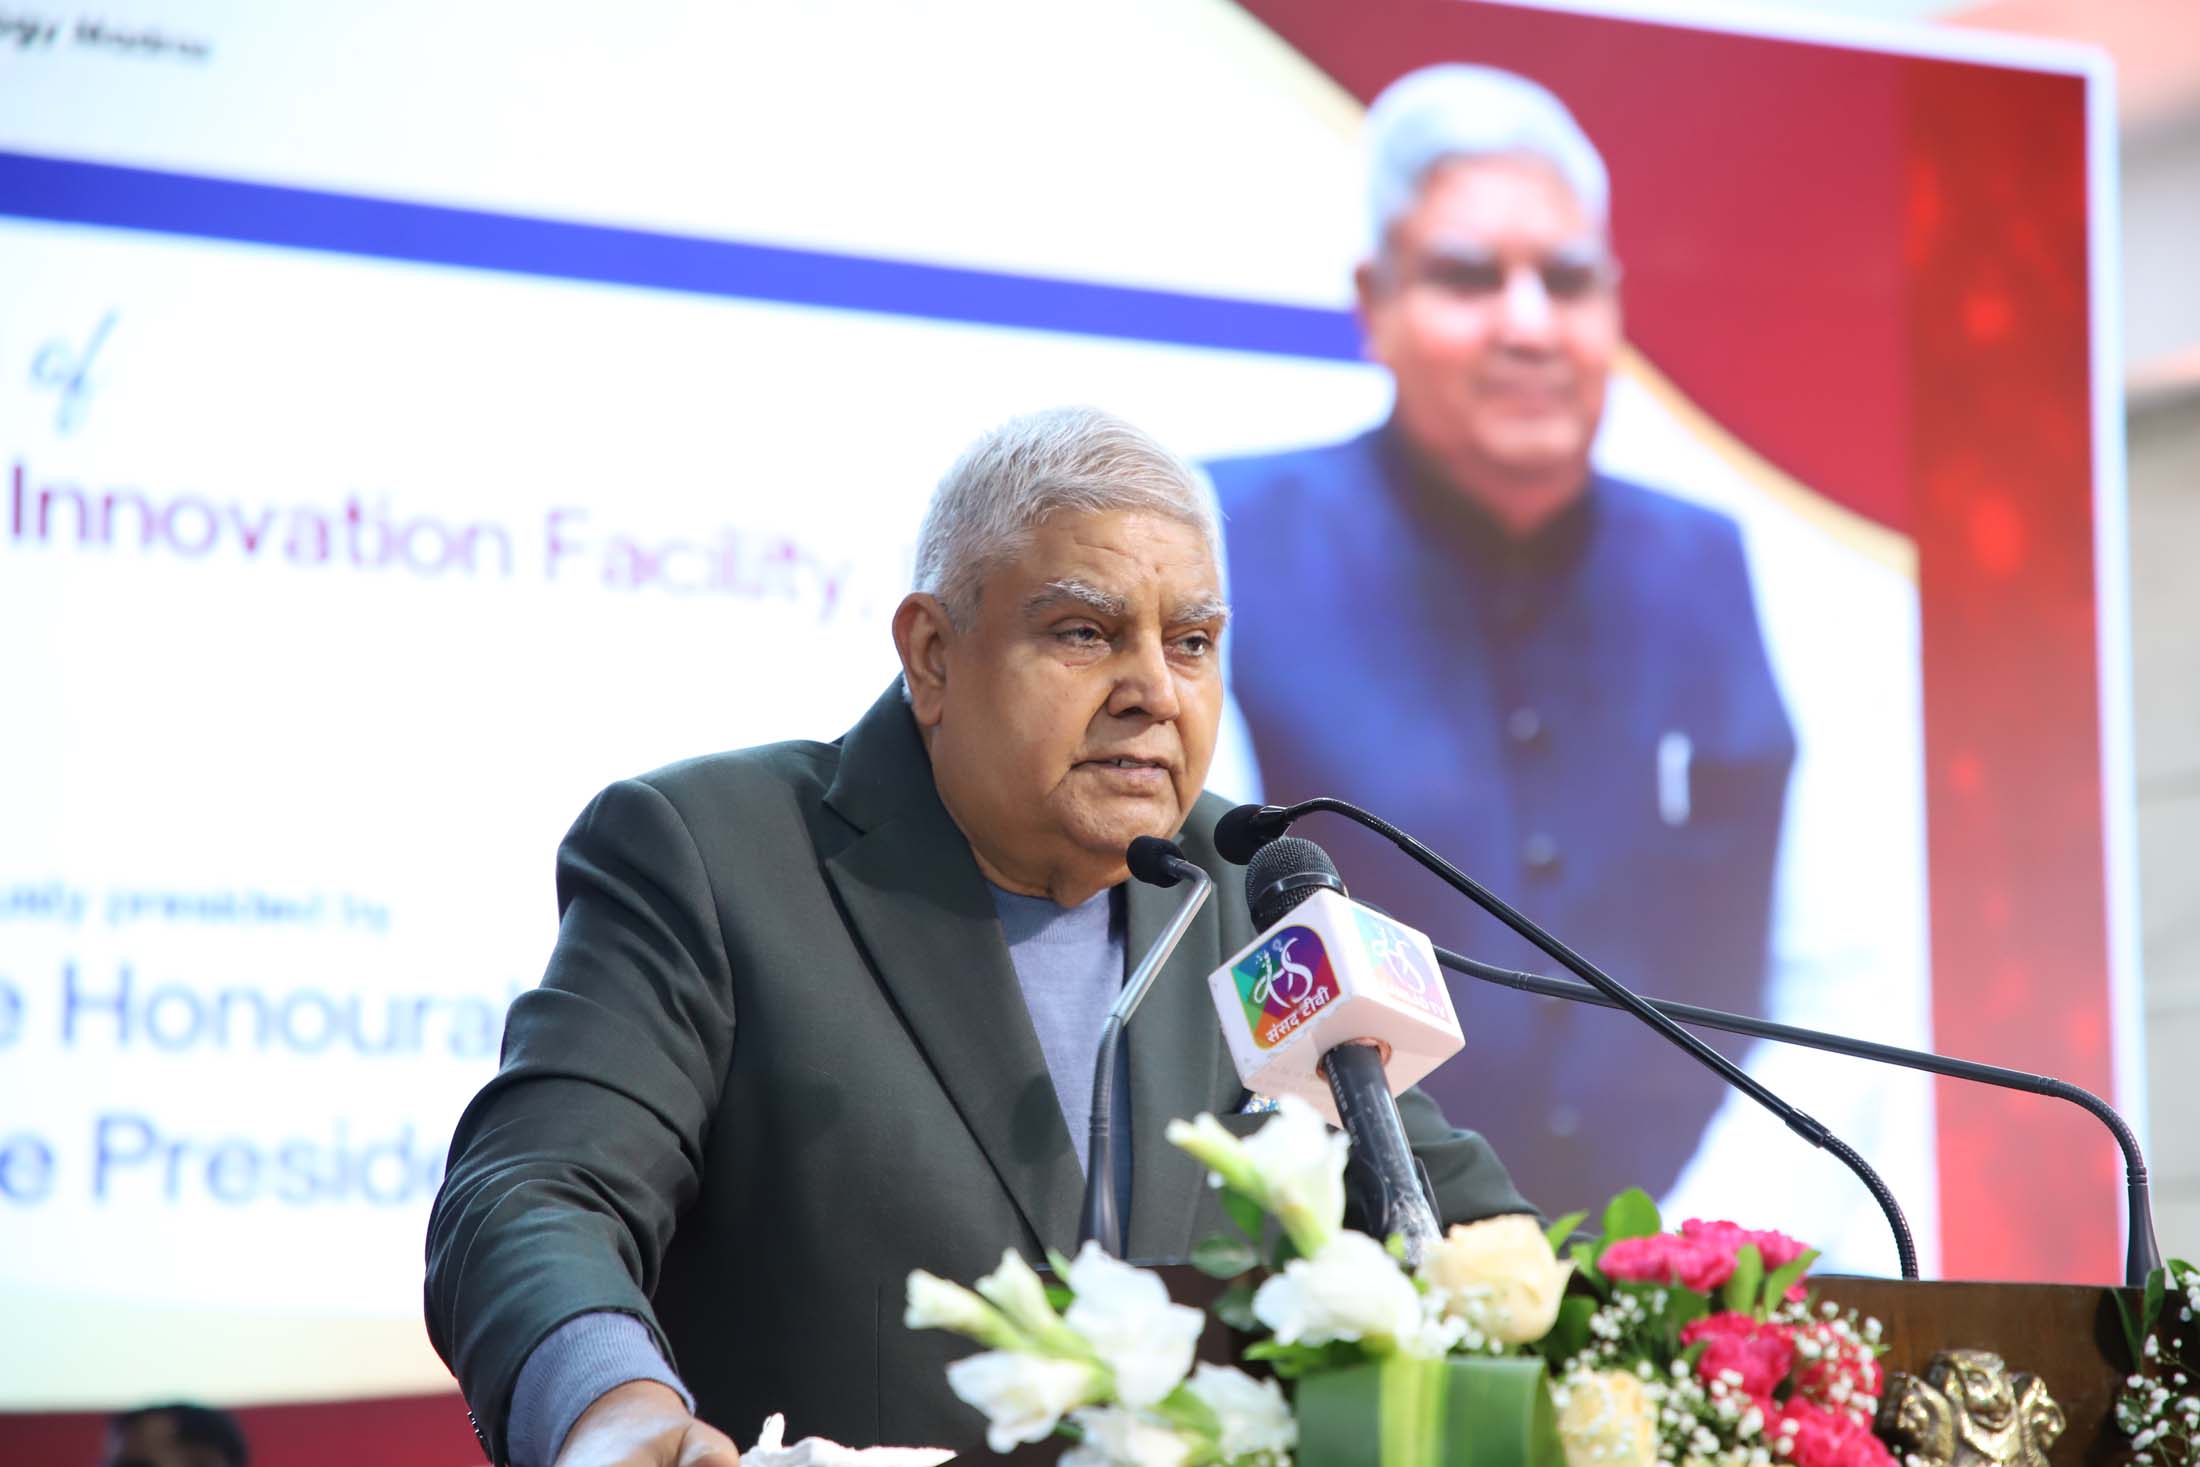 The Vice President, Shri Jagdeep Dhankhar addressing the students and researchers at the Centre for Innovation at IIT Madras in Chennai, Tamil Nadu on February 28, 2023.